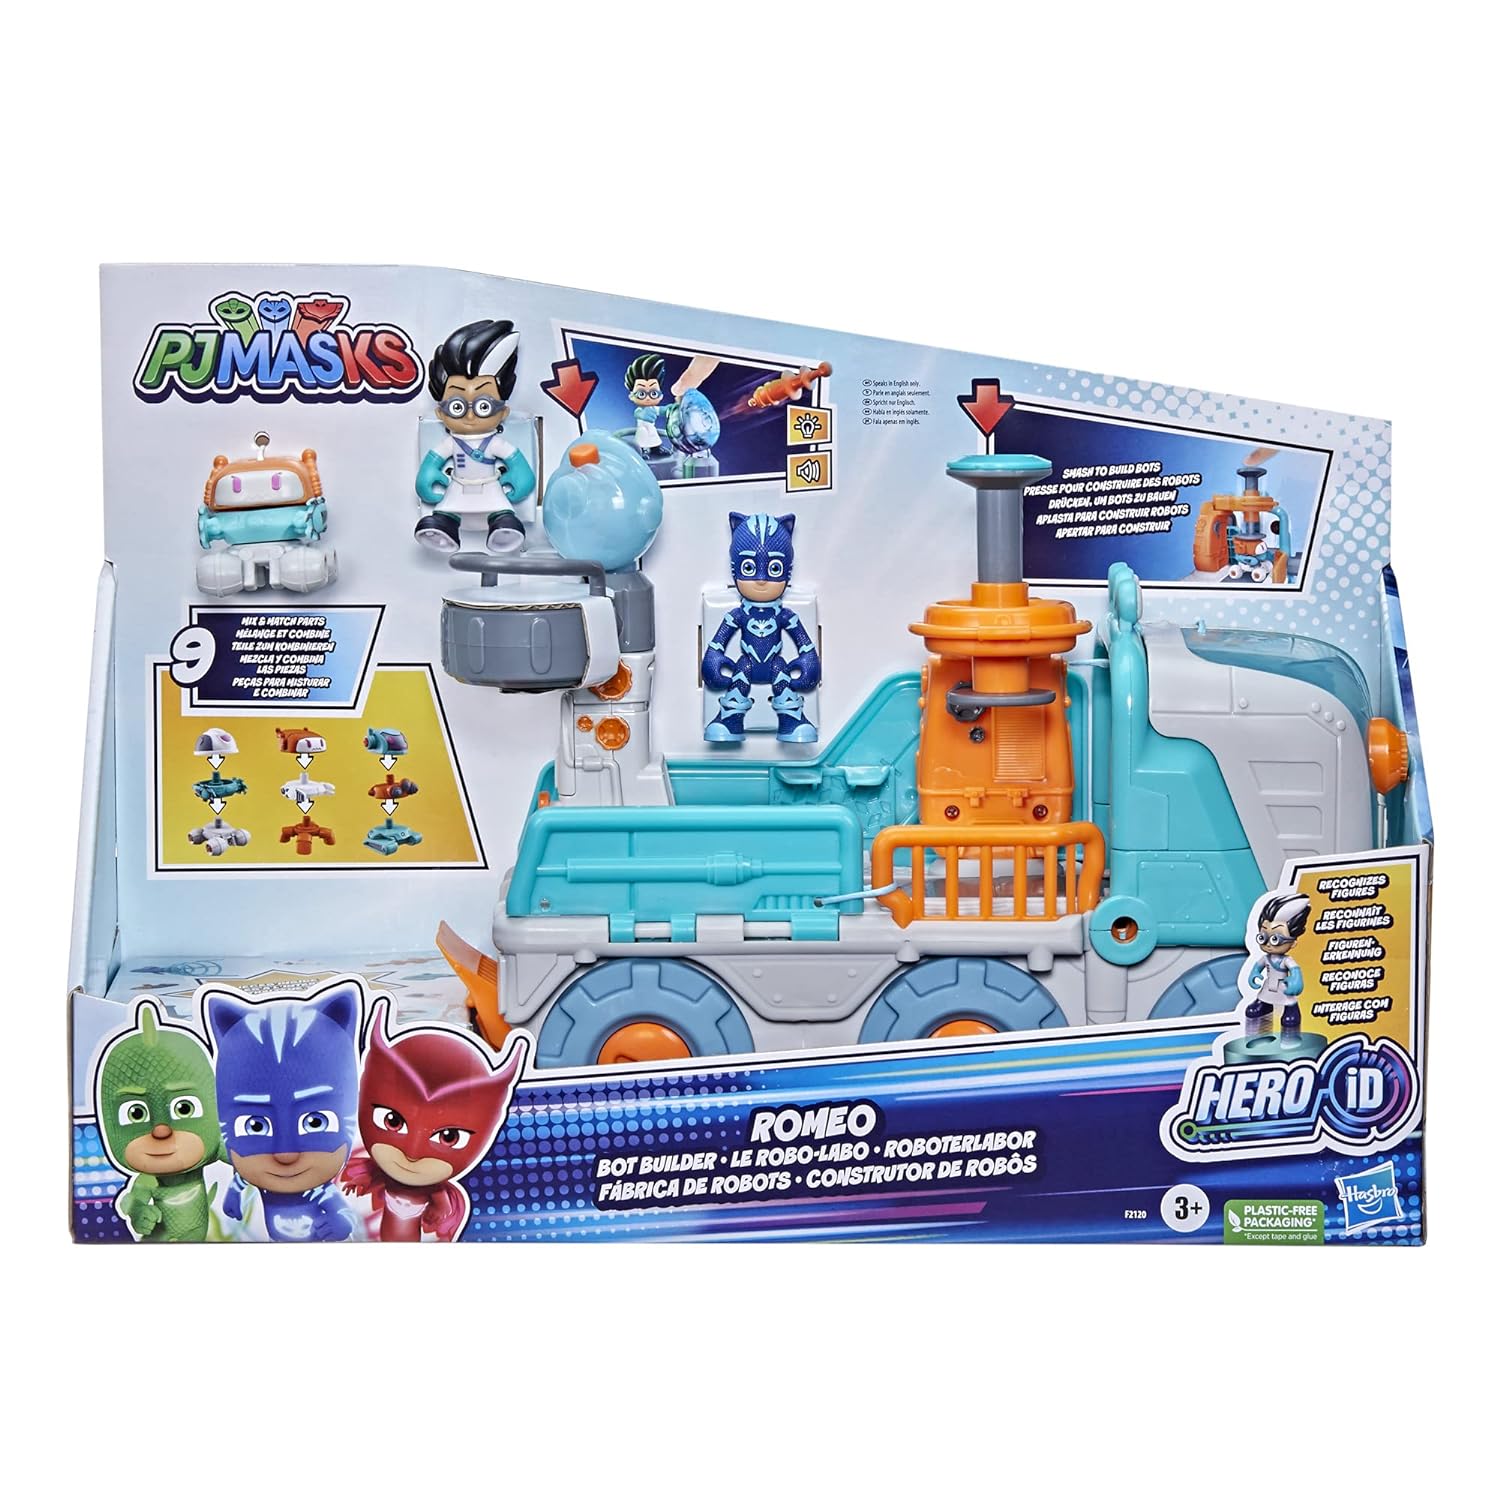 Hasbro PJ Masks Romeo Bot Builder Vehicle Playset with Lights and Sounds, Preschool Toys, Superhero Toys, Toys for 3 Year Old Boys…